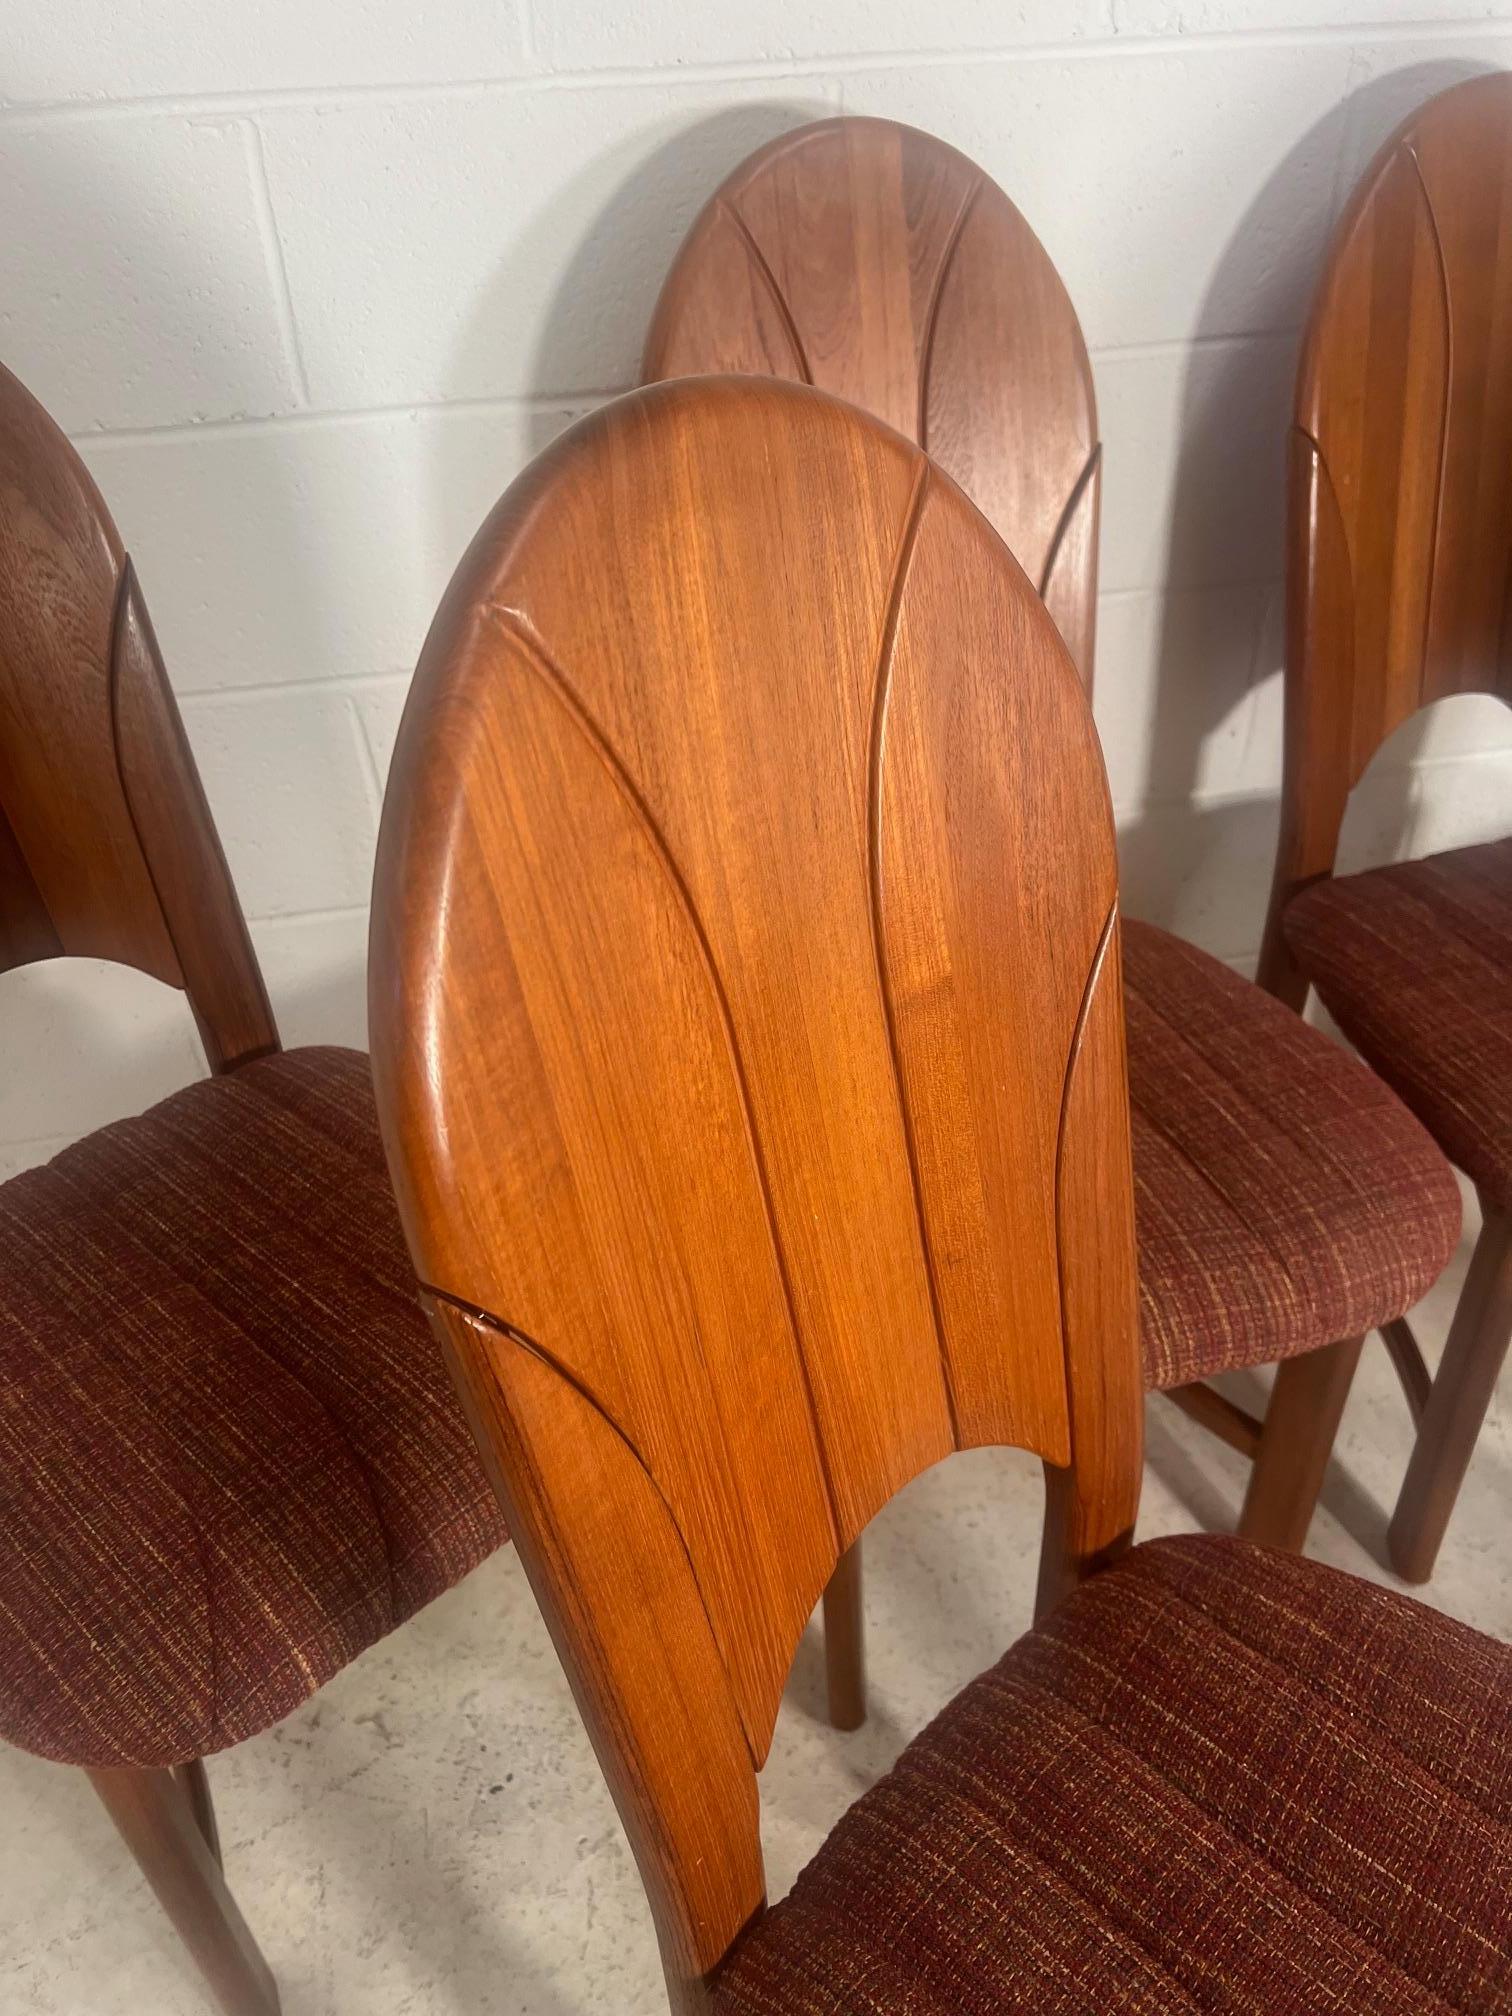 Set of 6 mid century modern Danish teak dining chairs by D-Scan.

Very good vintage condition. Some minor marks on the frames. One chair with puppy chew marks at the bottom. Two chairs have had additional screws put in underneath the seat by a